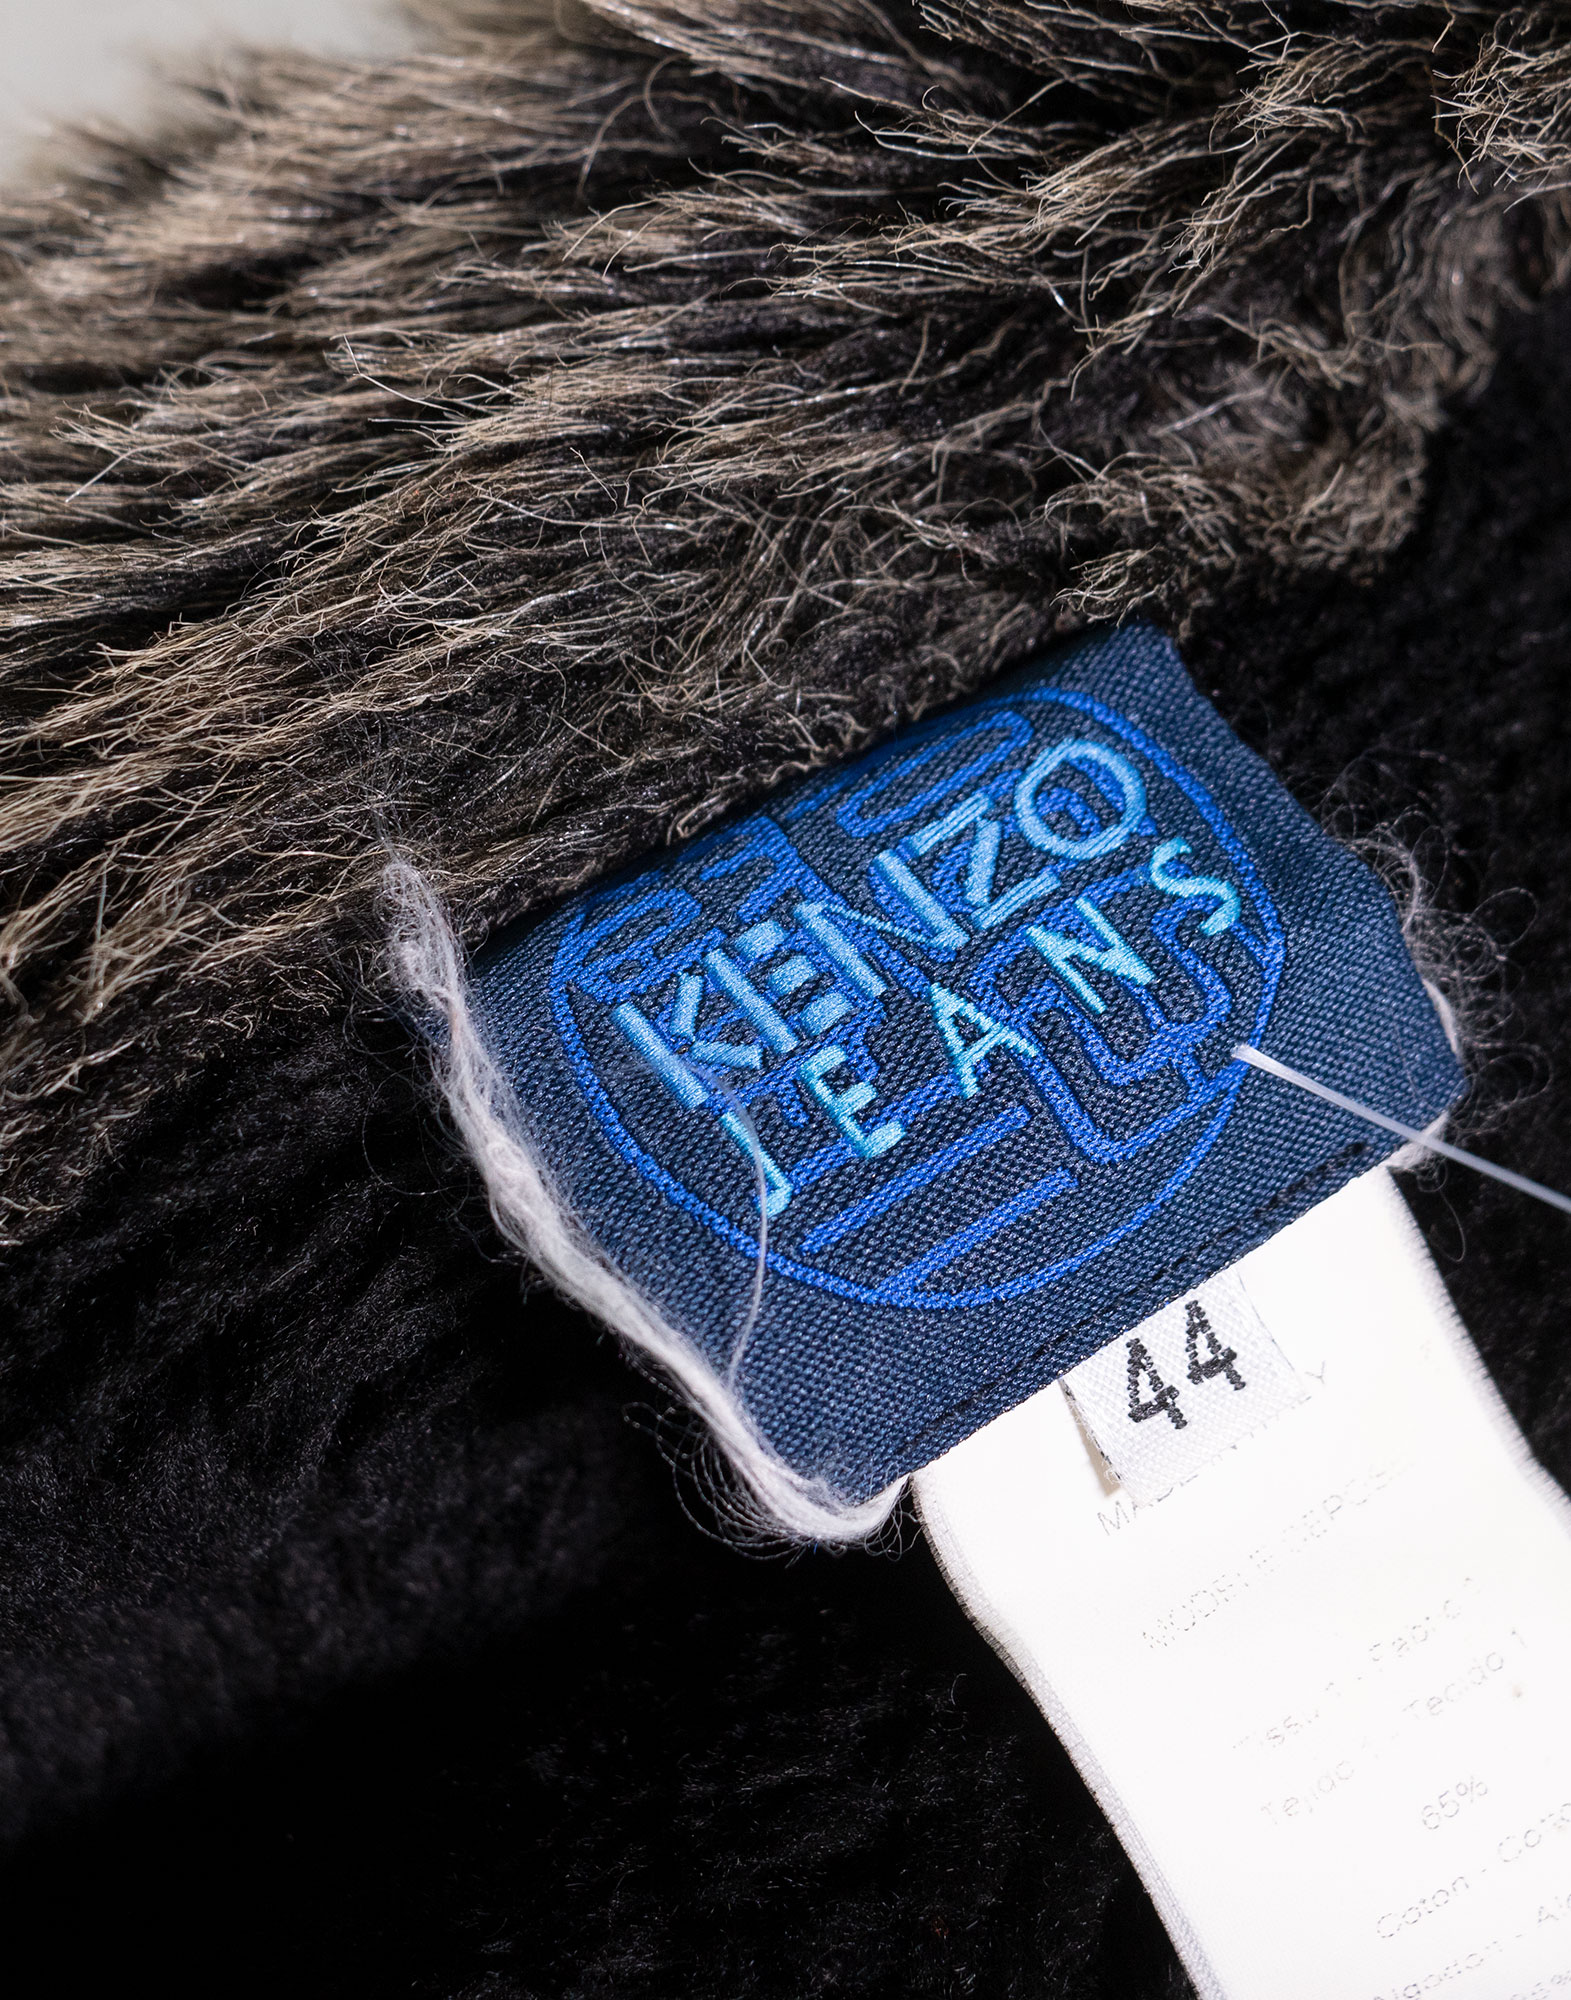 Kenzo Jeans - Giacca anni '80 stile giapponese